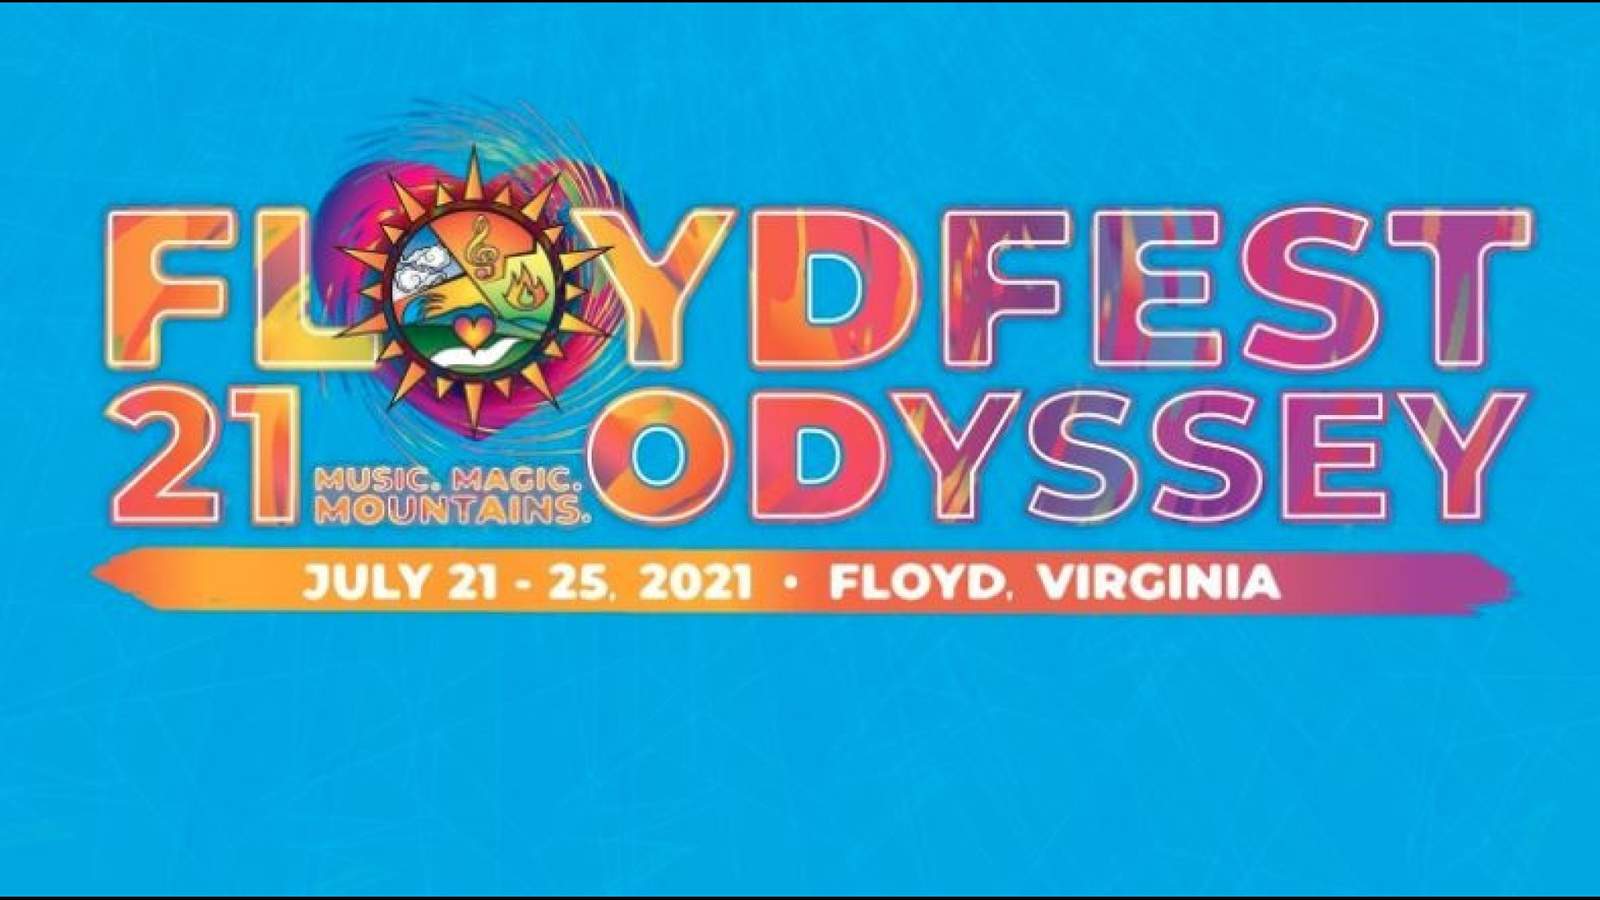 Billy Strings replaces Sturgill Simpson for FloydFest lineup